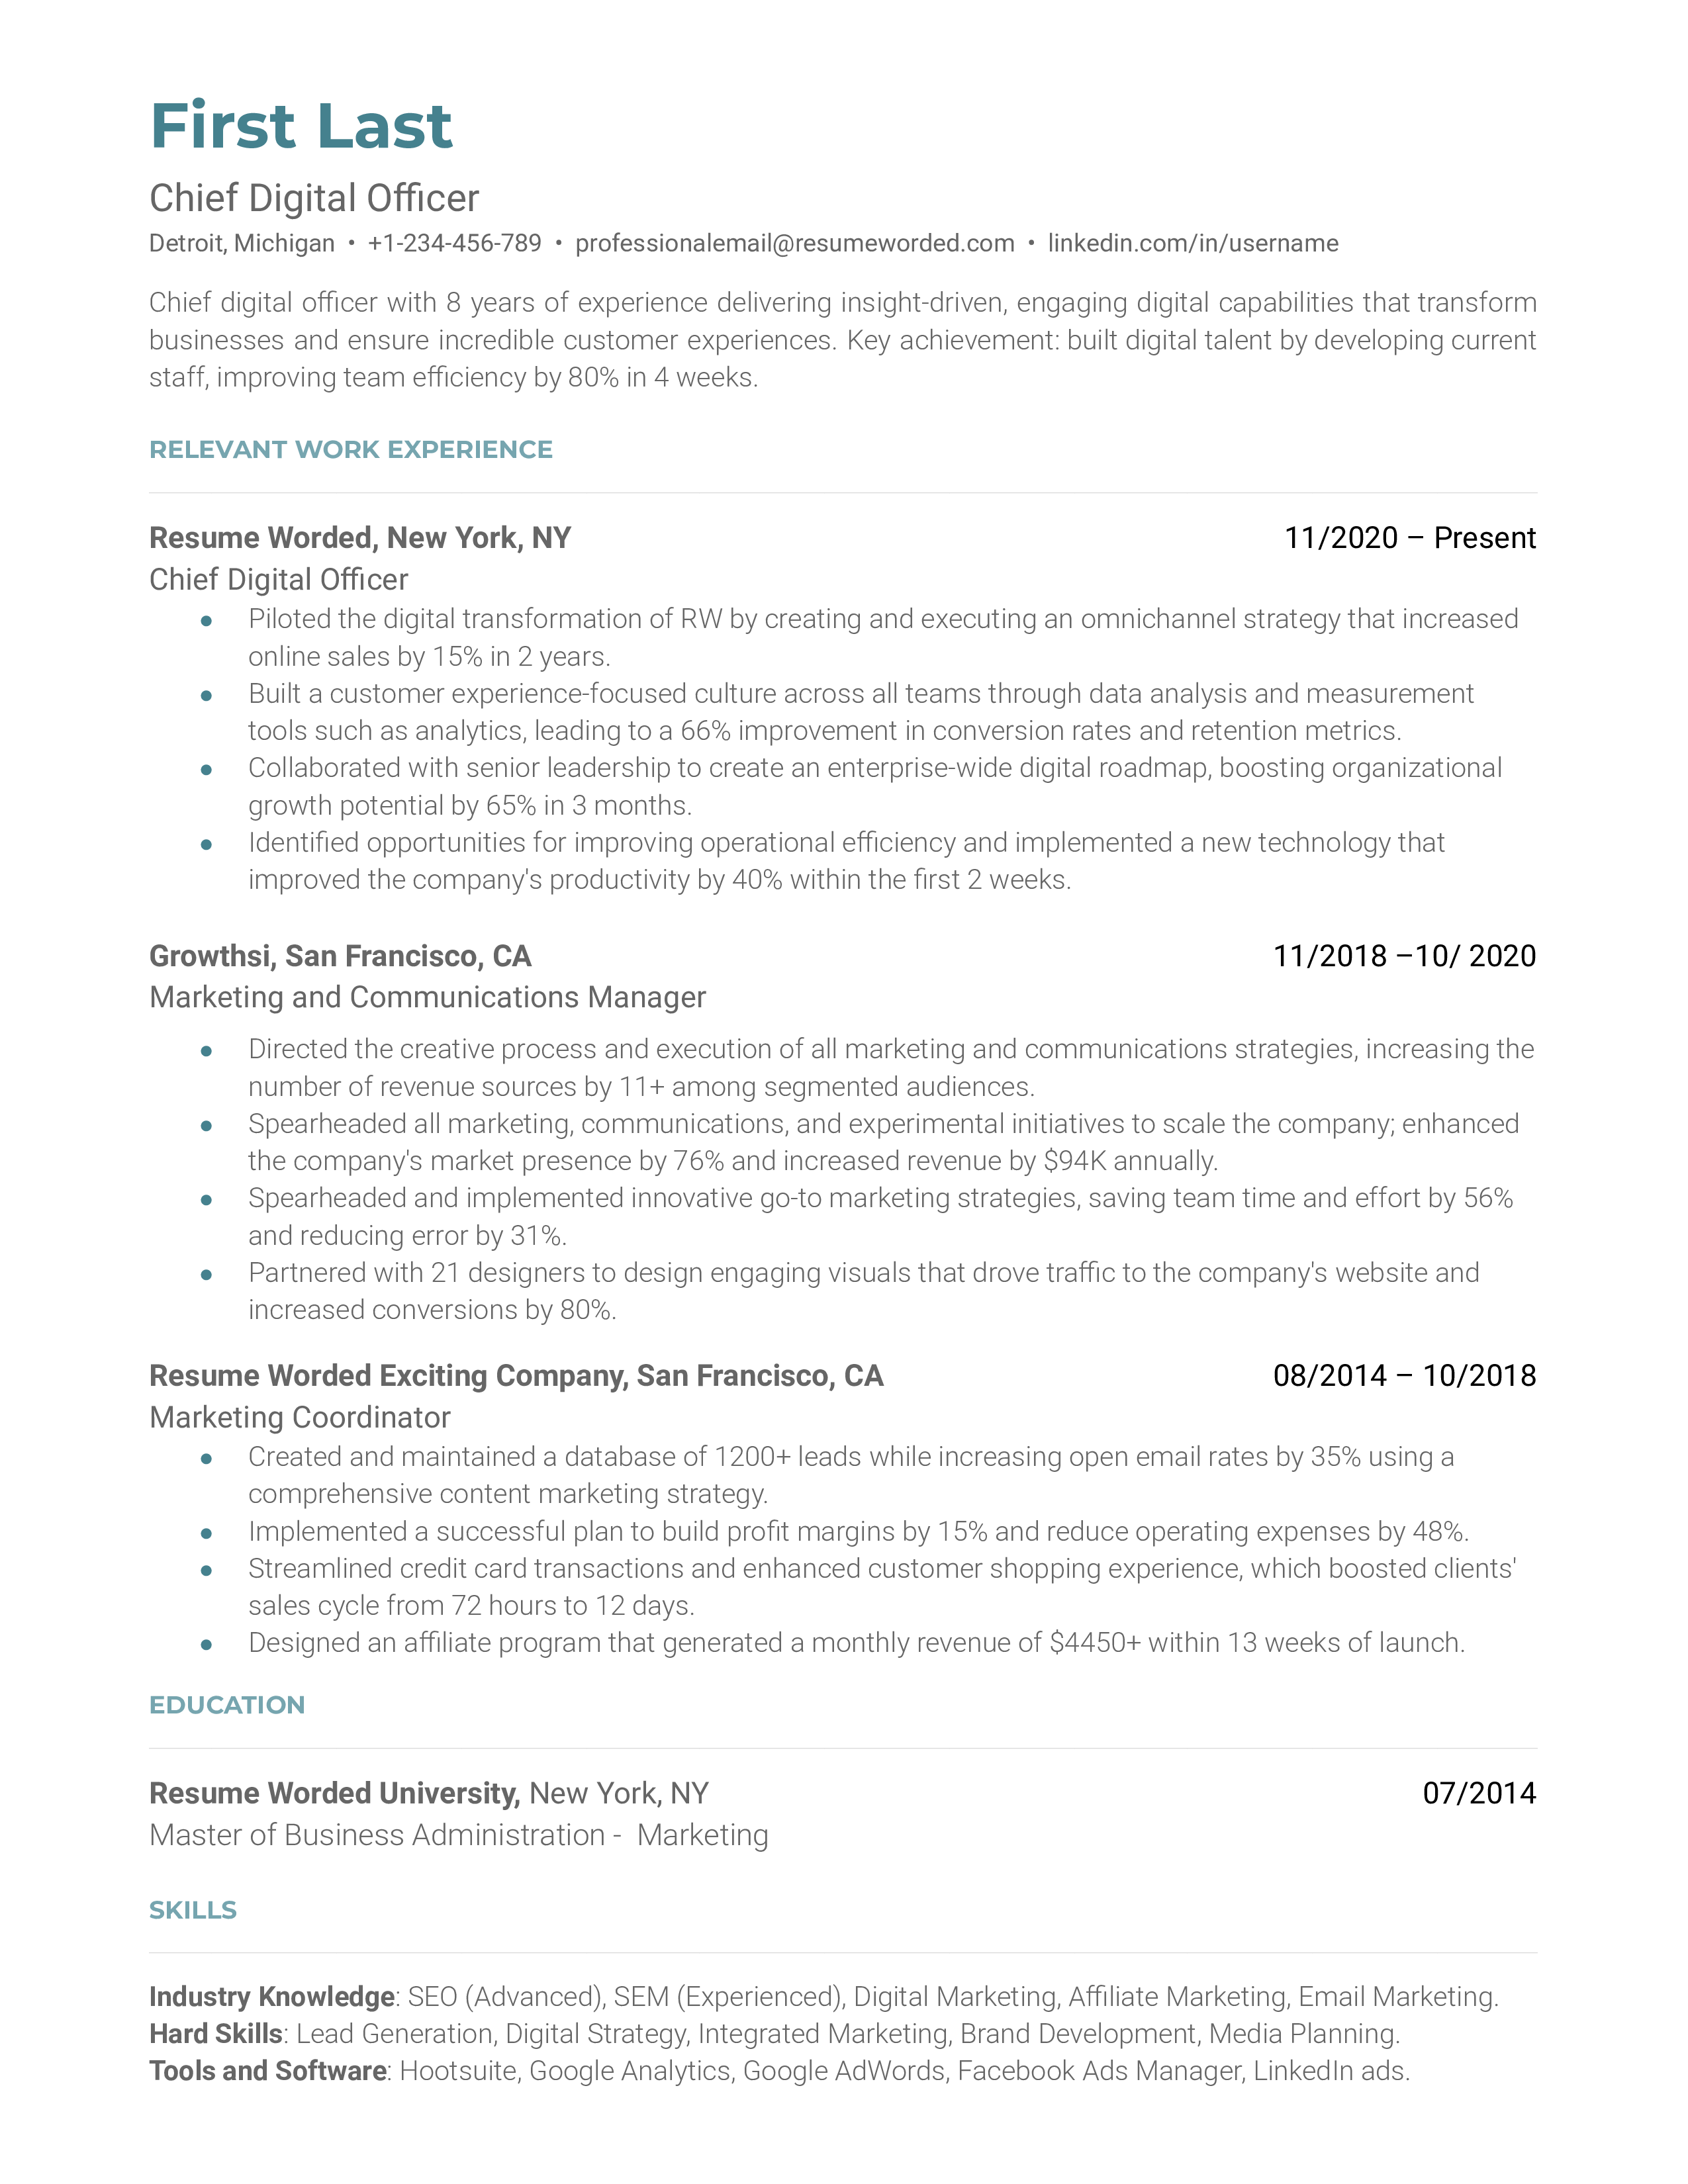 A chief digital officer resume template that highlights achievements